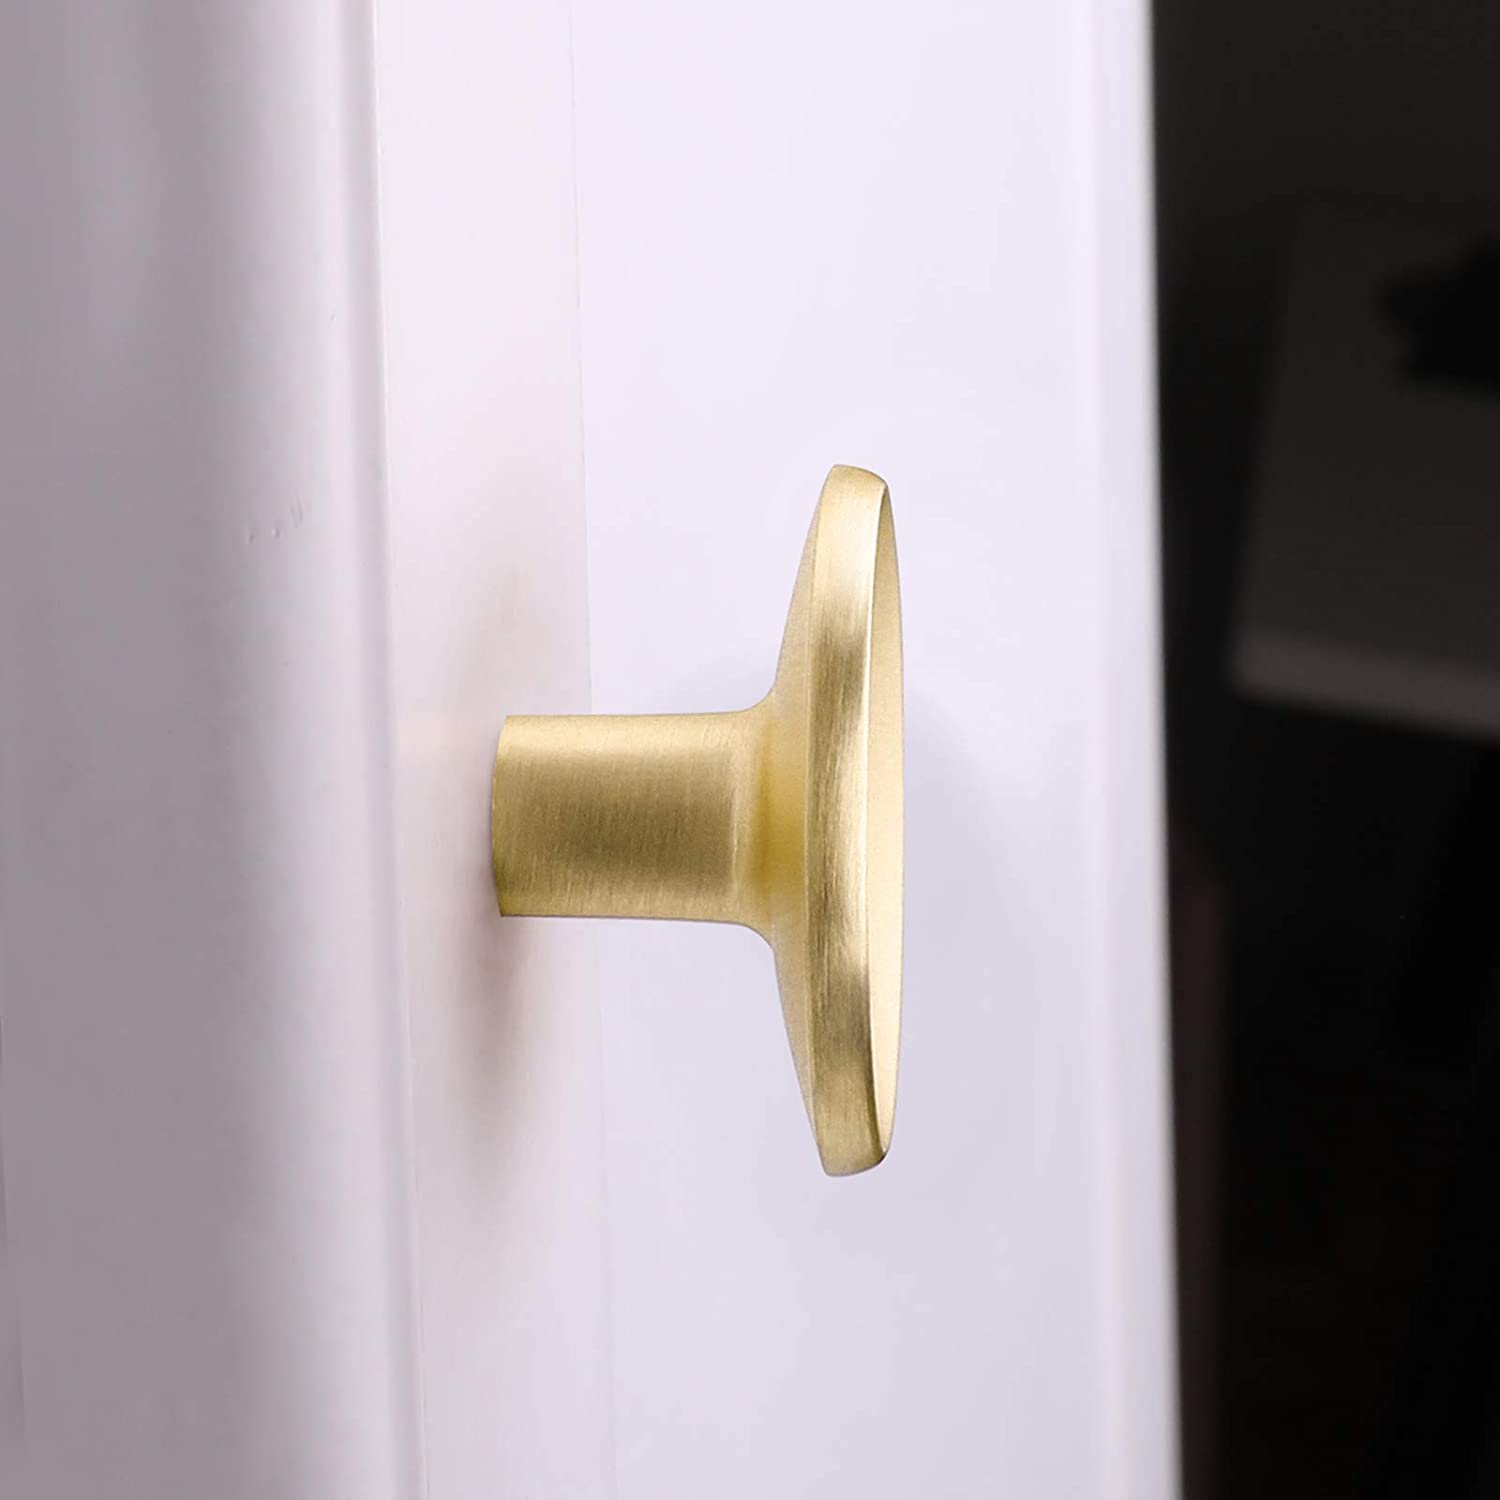 10 Pack Brushed Brass Cabinet Knobs Round Drawer Knobs For Kitchen Cabinets (LS4008GD) -Homdiy